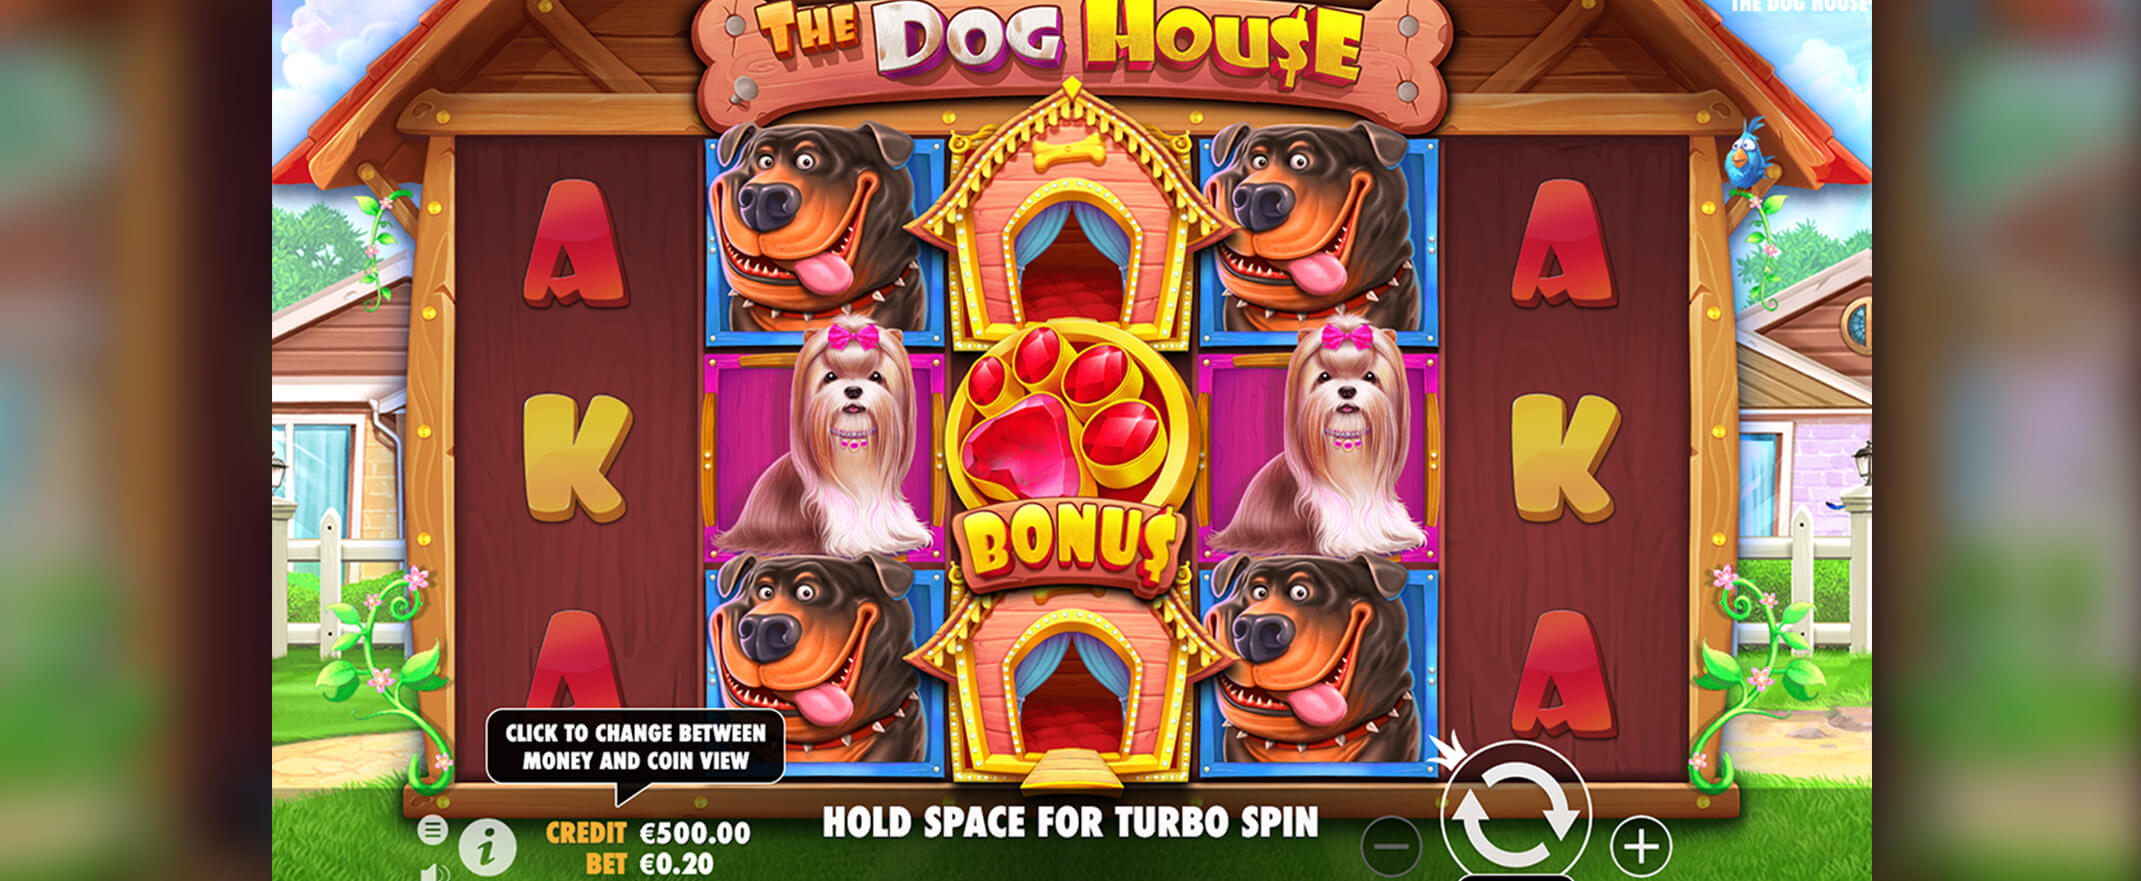 Dog House video slot from Pragmatic Play